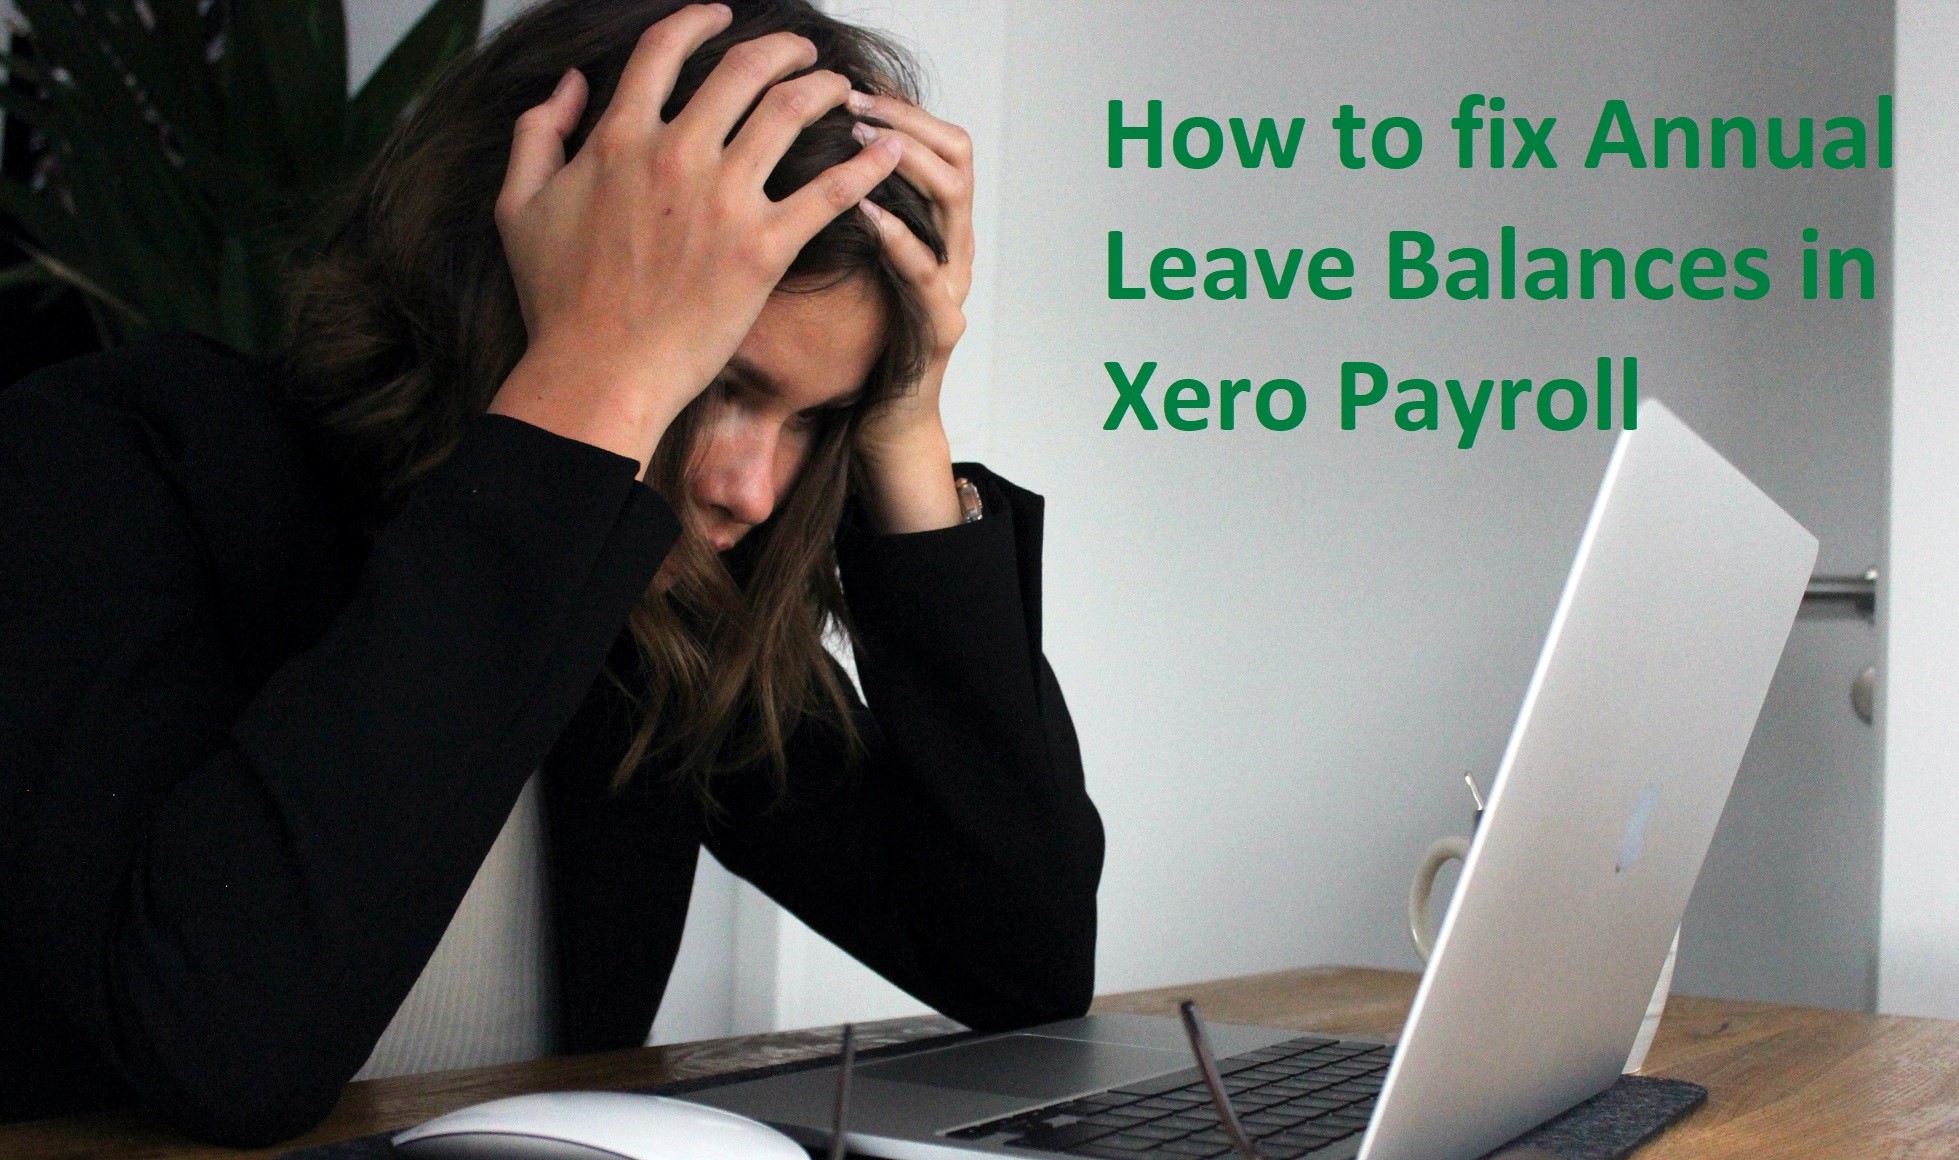 How to Fix Annual Leave Balances in Xero Payroll